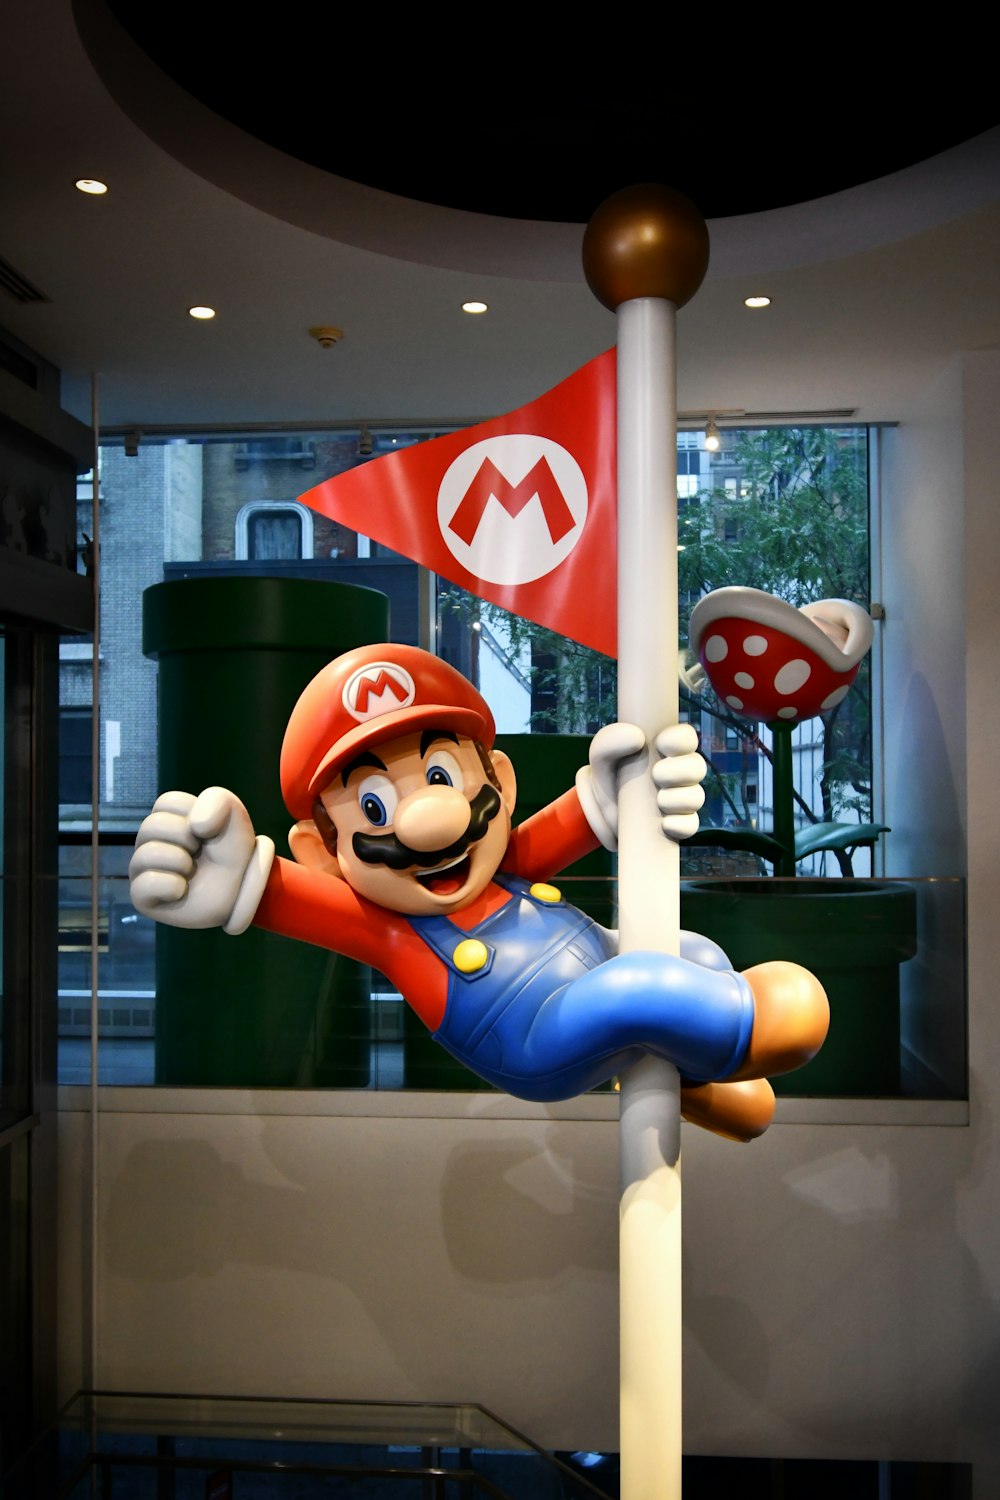 Super Mario Holding M MS Candy Stock